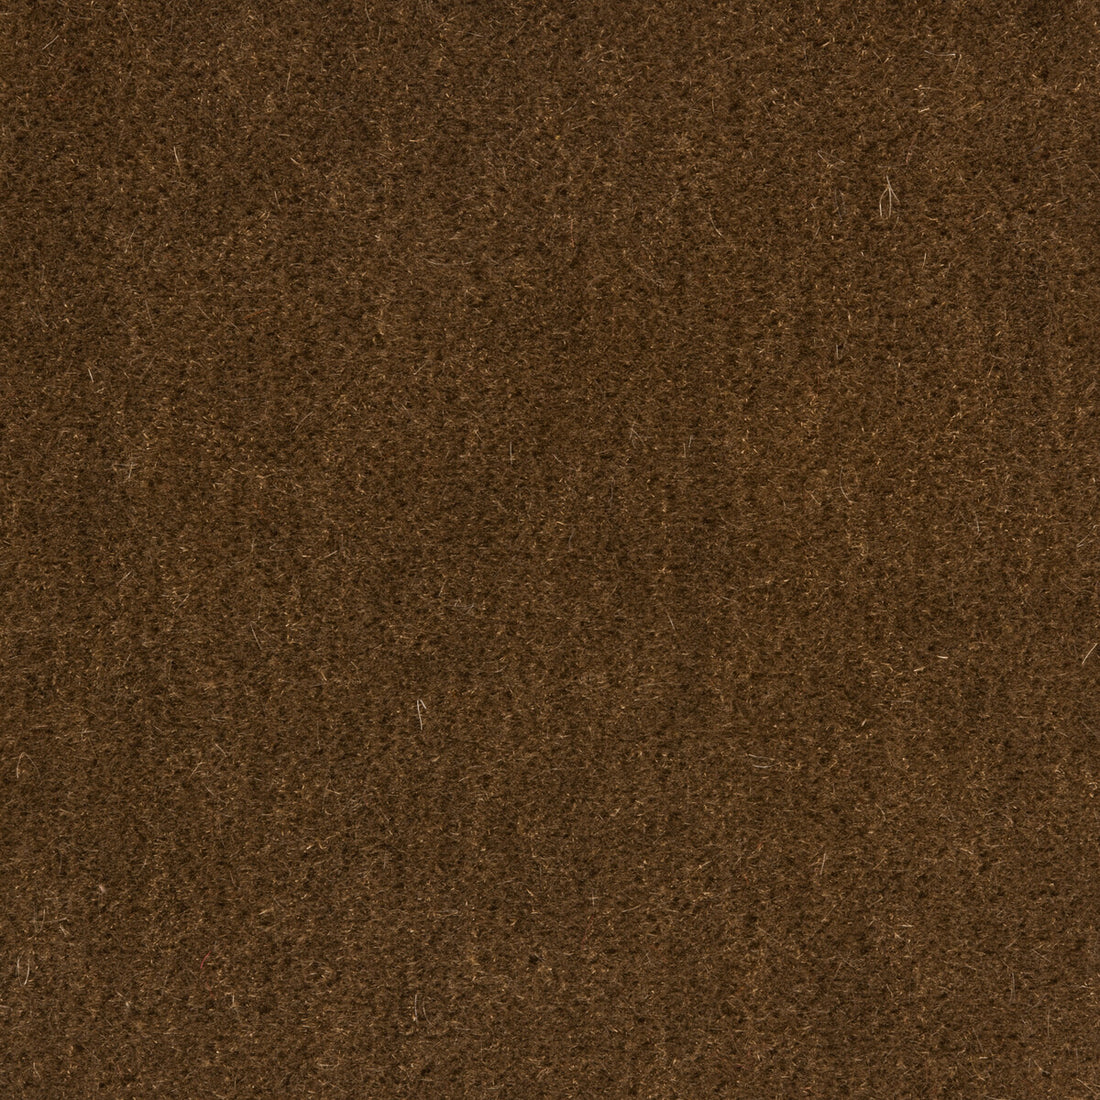 Bachelor Mohair fabric in chestnut color - pattern 8014101.616.0 - by Brunschwig &amp; Fils